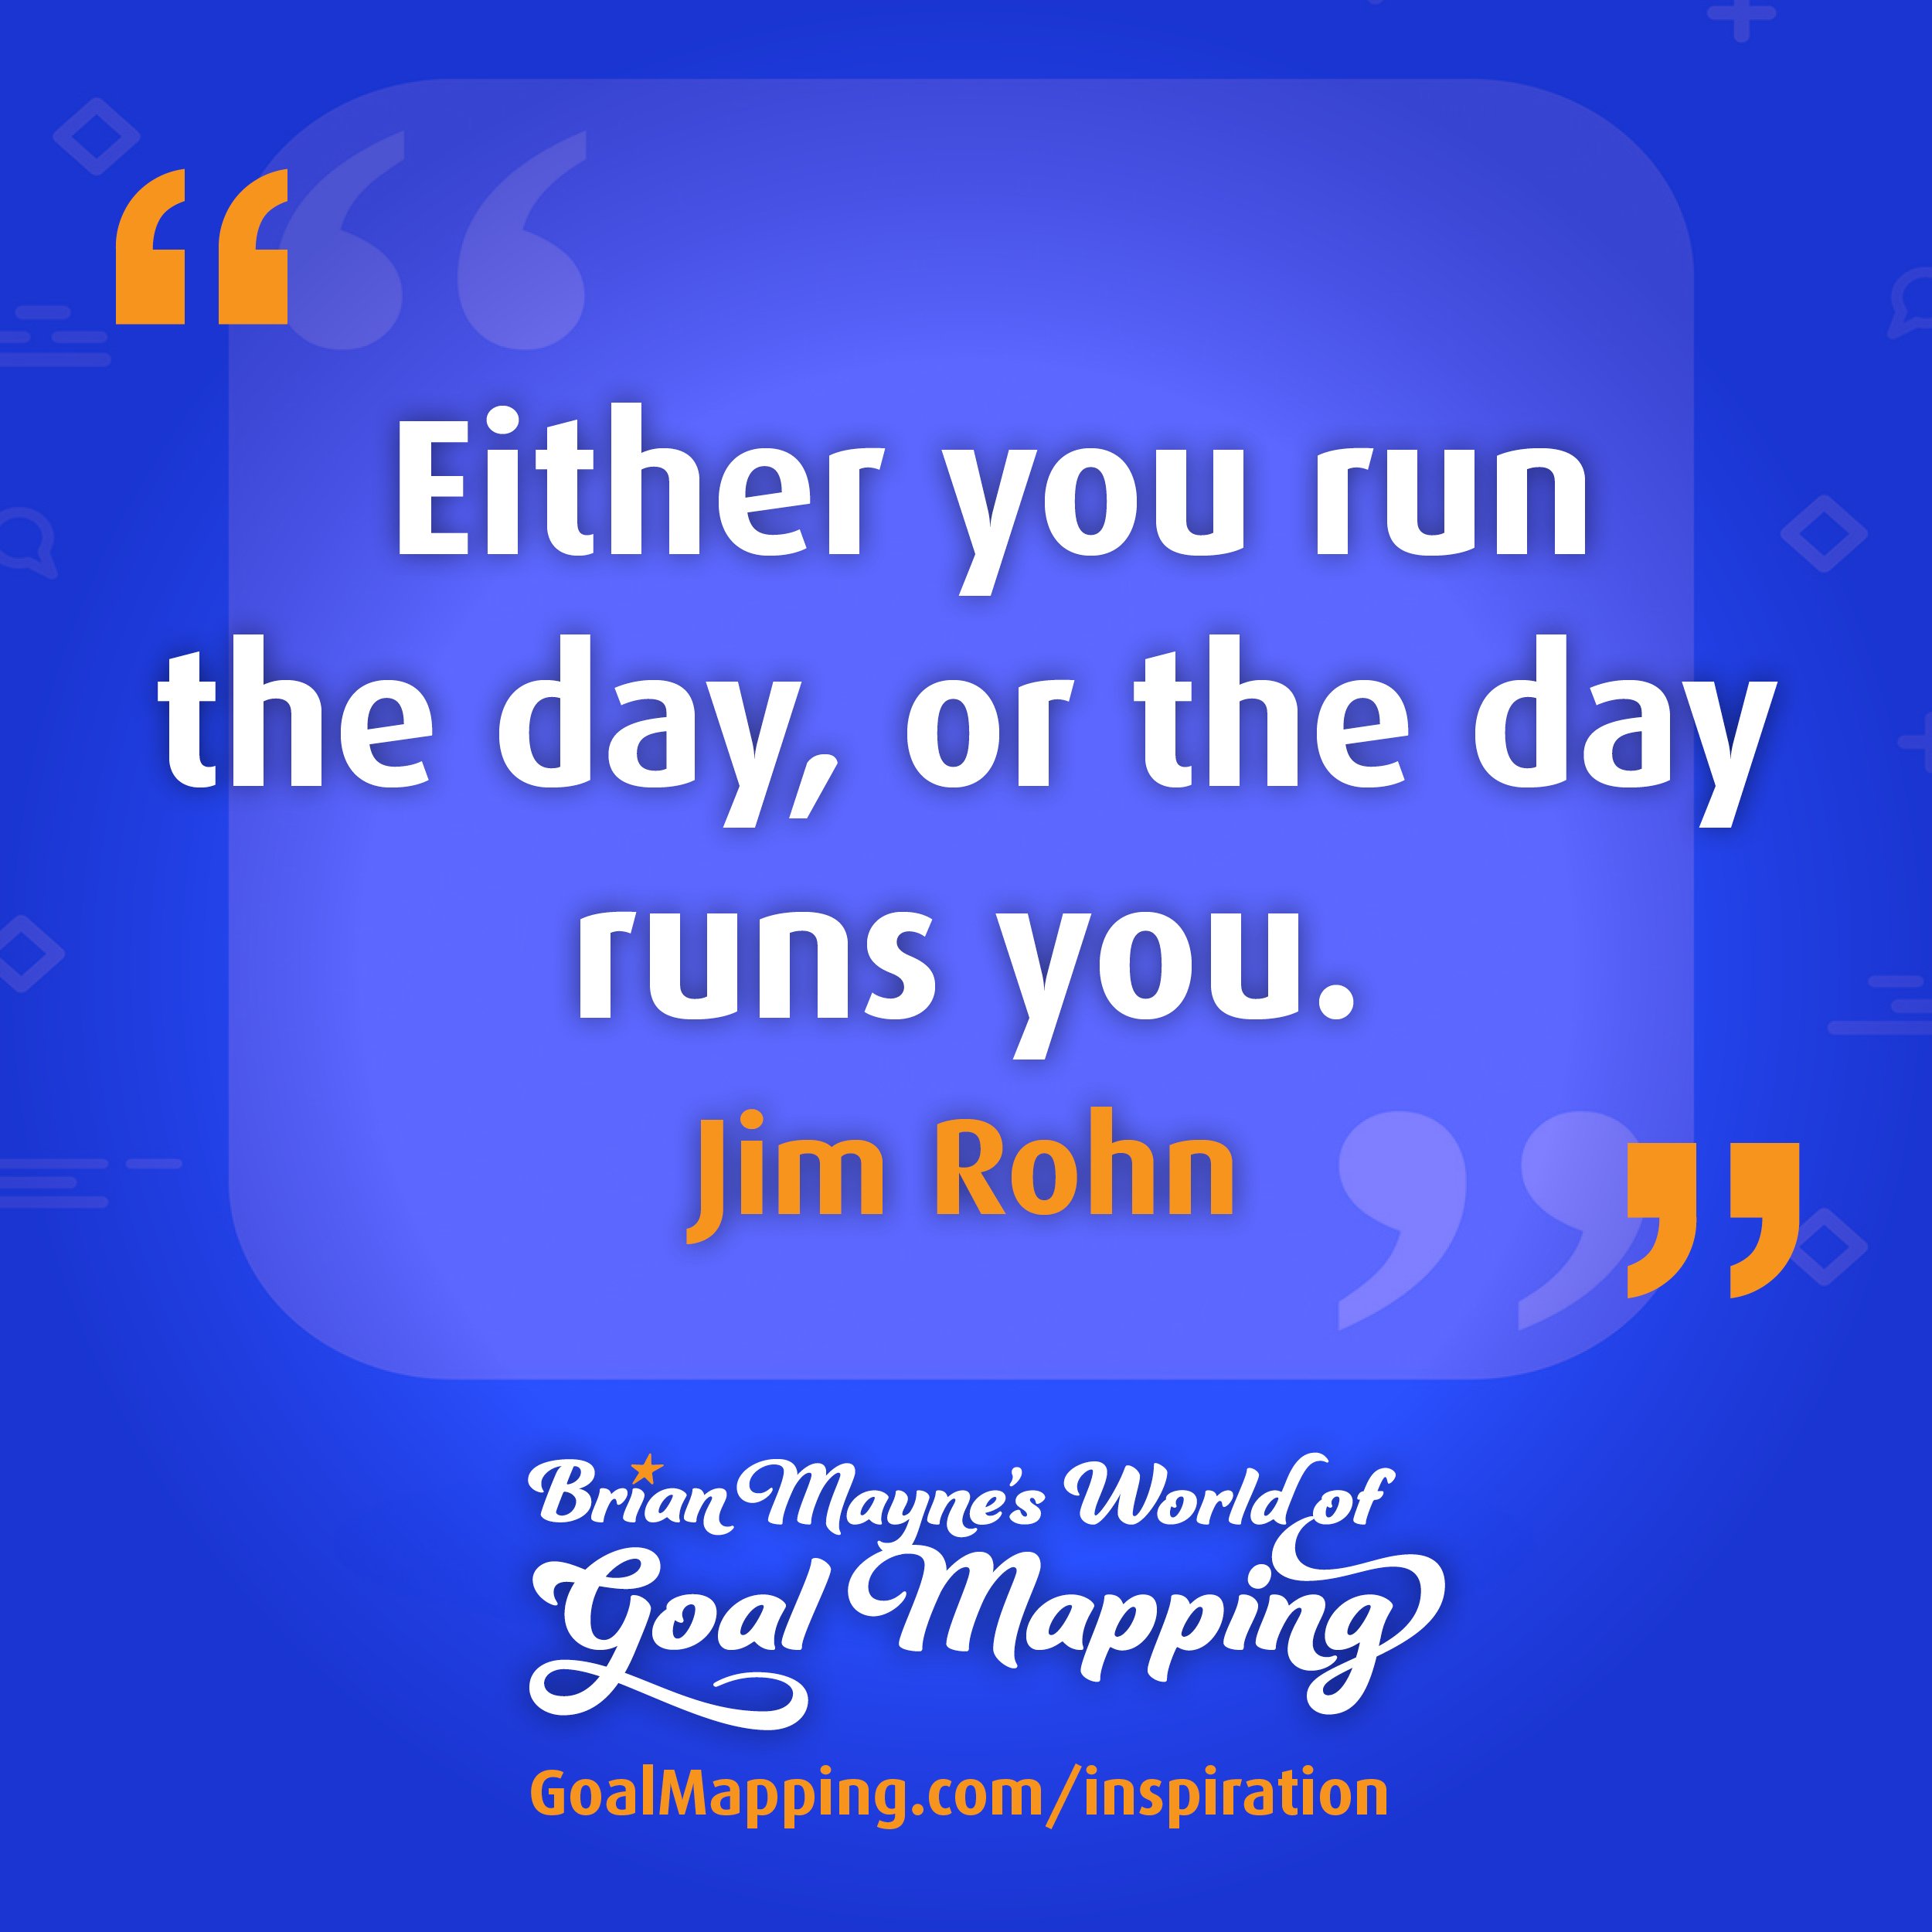 "Either you run the day, or the day runs you." Jim Rohn